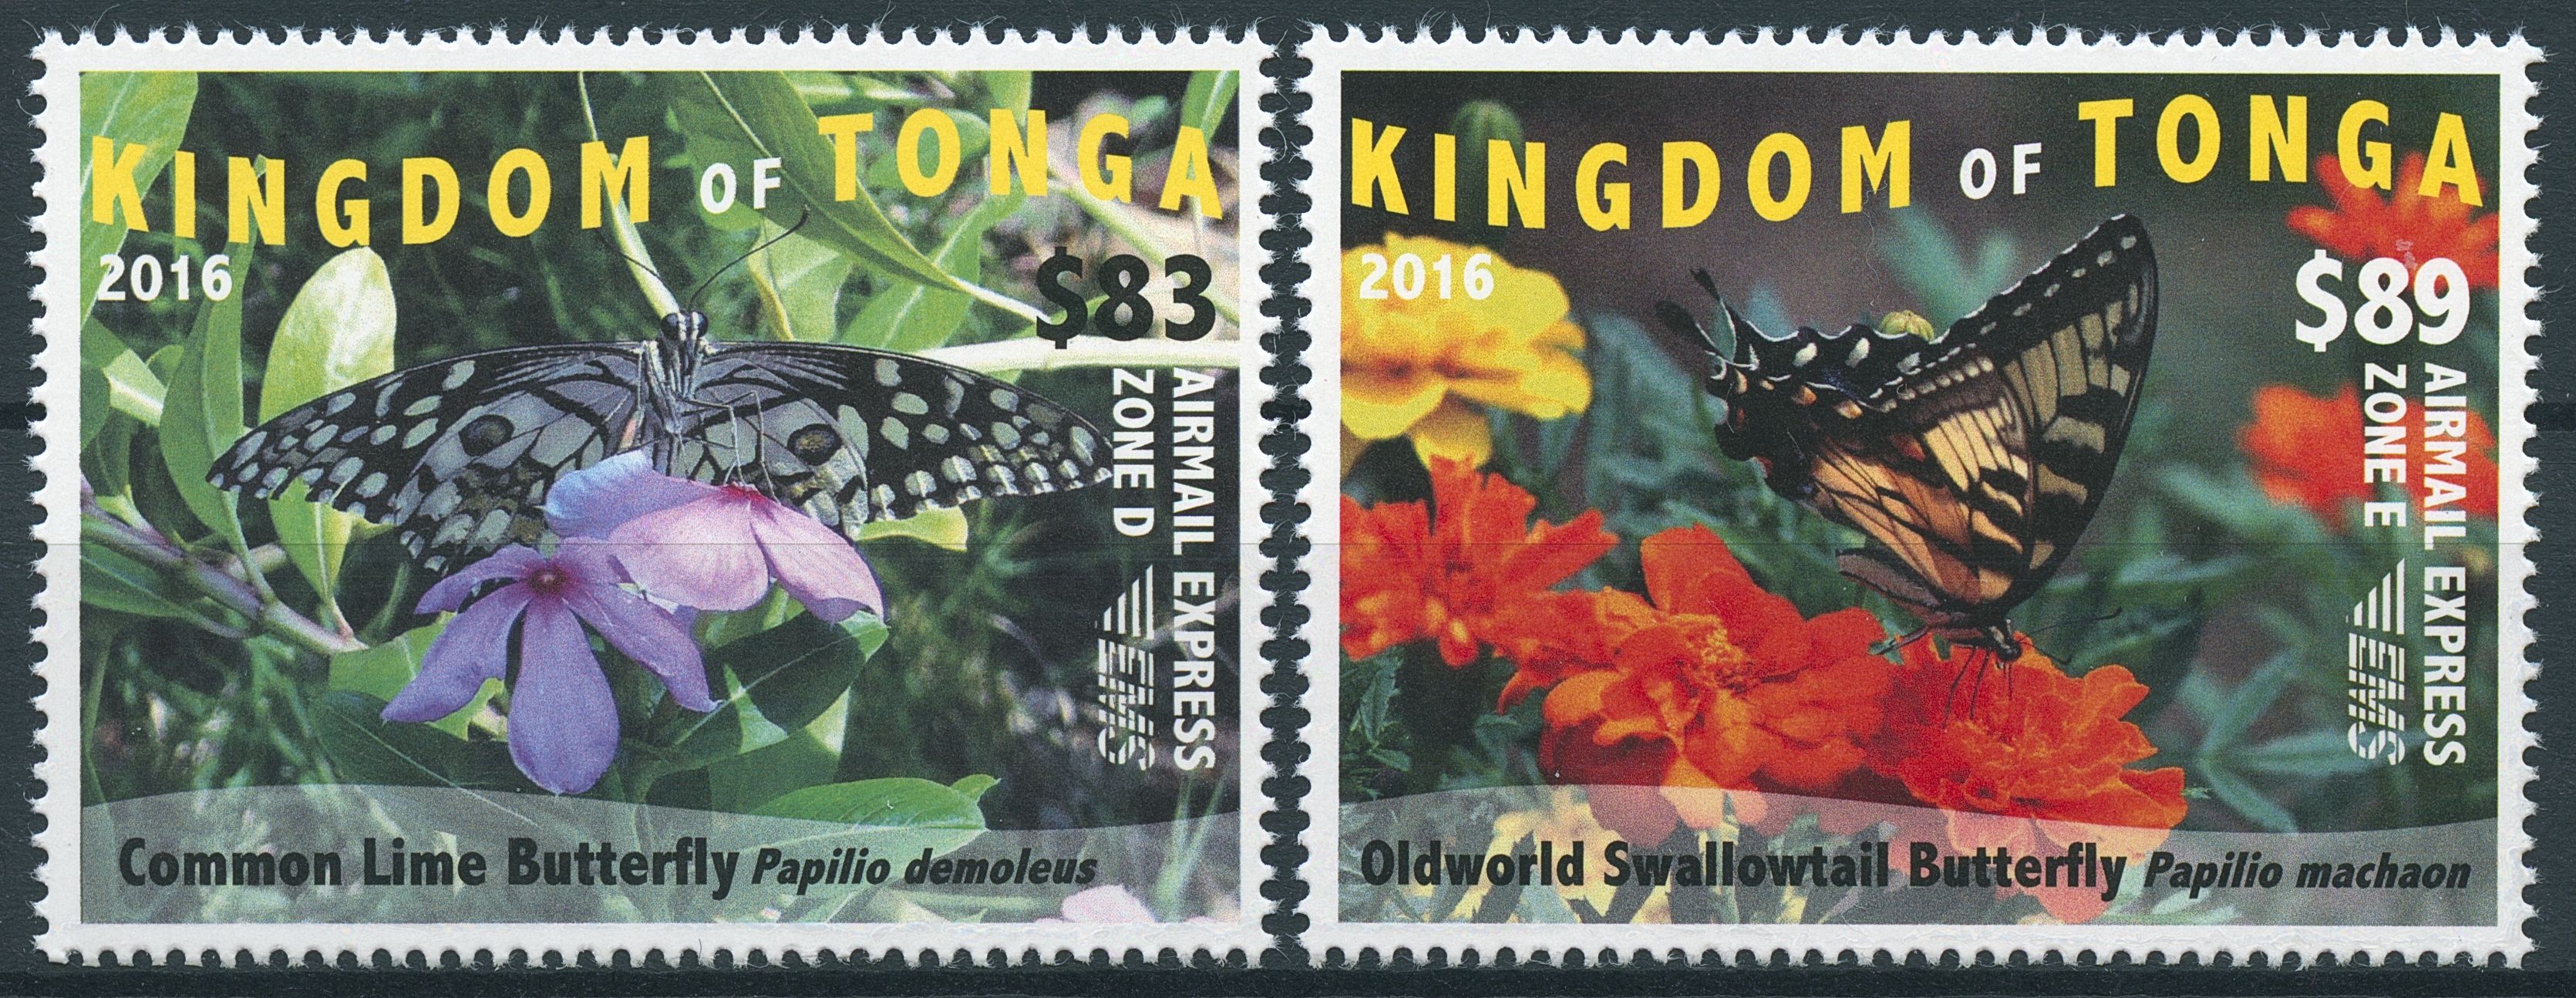 Tonga 2016 MNH Butterflies 2v Set Insects Lime Swallowtail Butterfly EMS Stamps